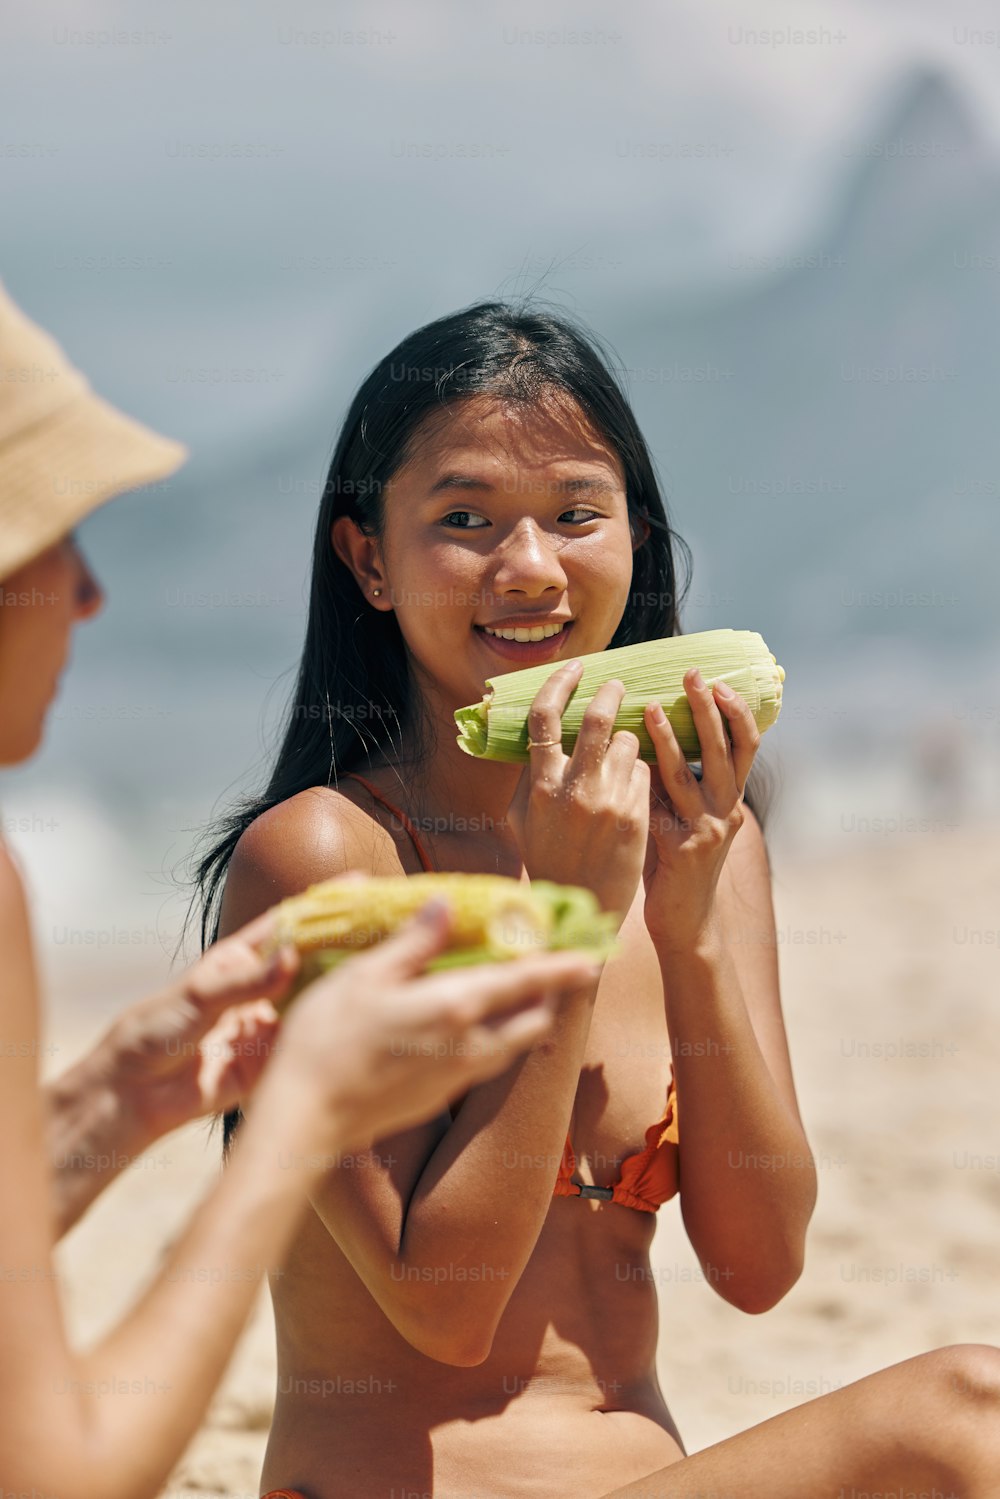 a woman sitting on the beach eating a piece of food